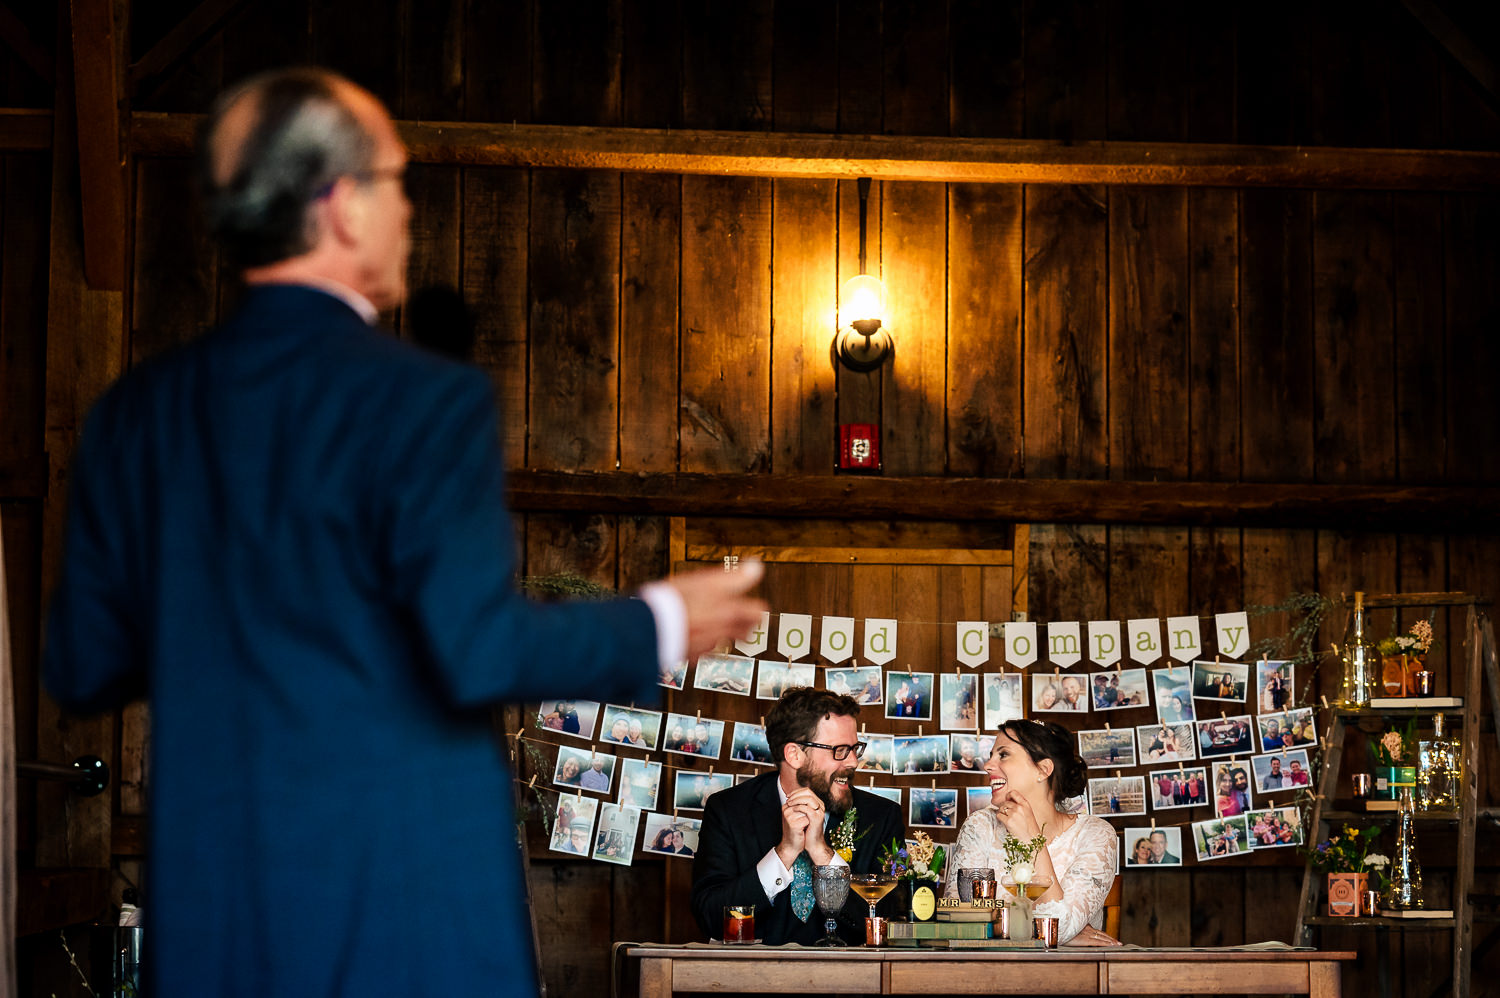 Anne and Jed sitting together at their table in their wedding barn while a man gives a speech.